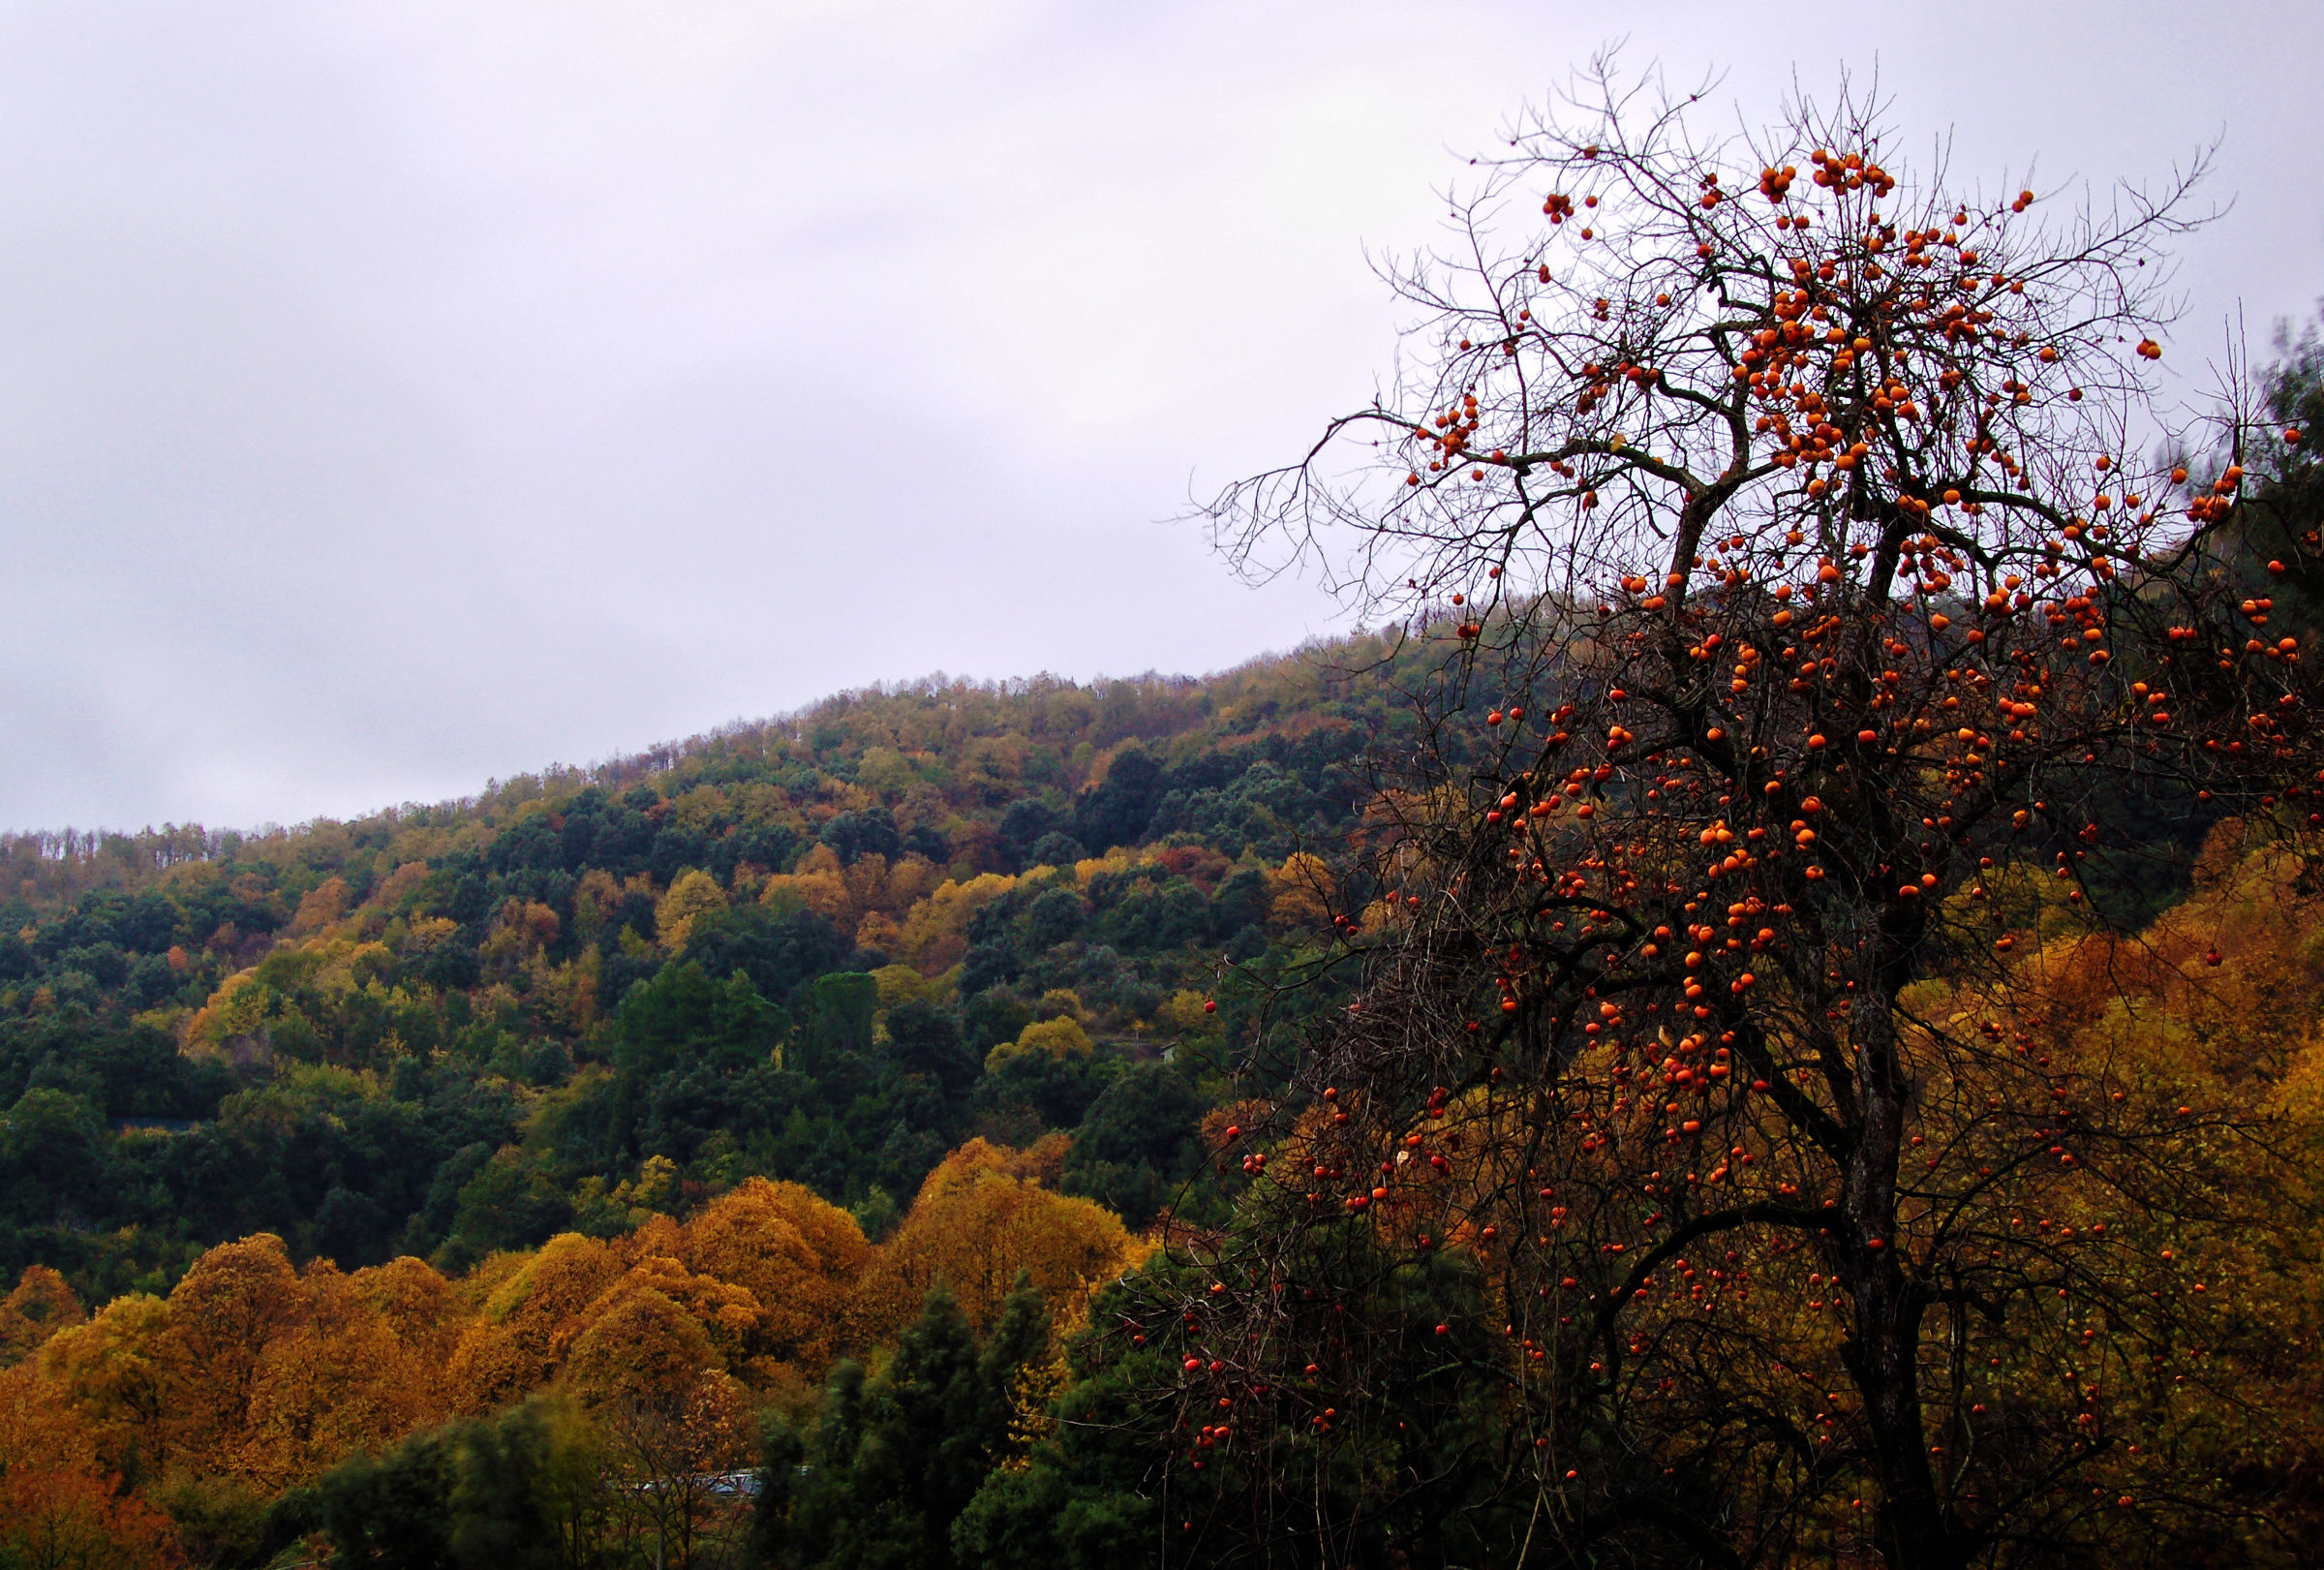 Autumn in the land of persimmons...